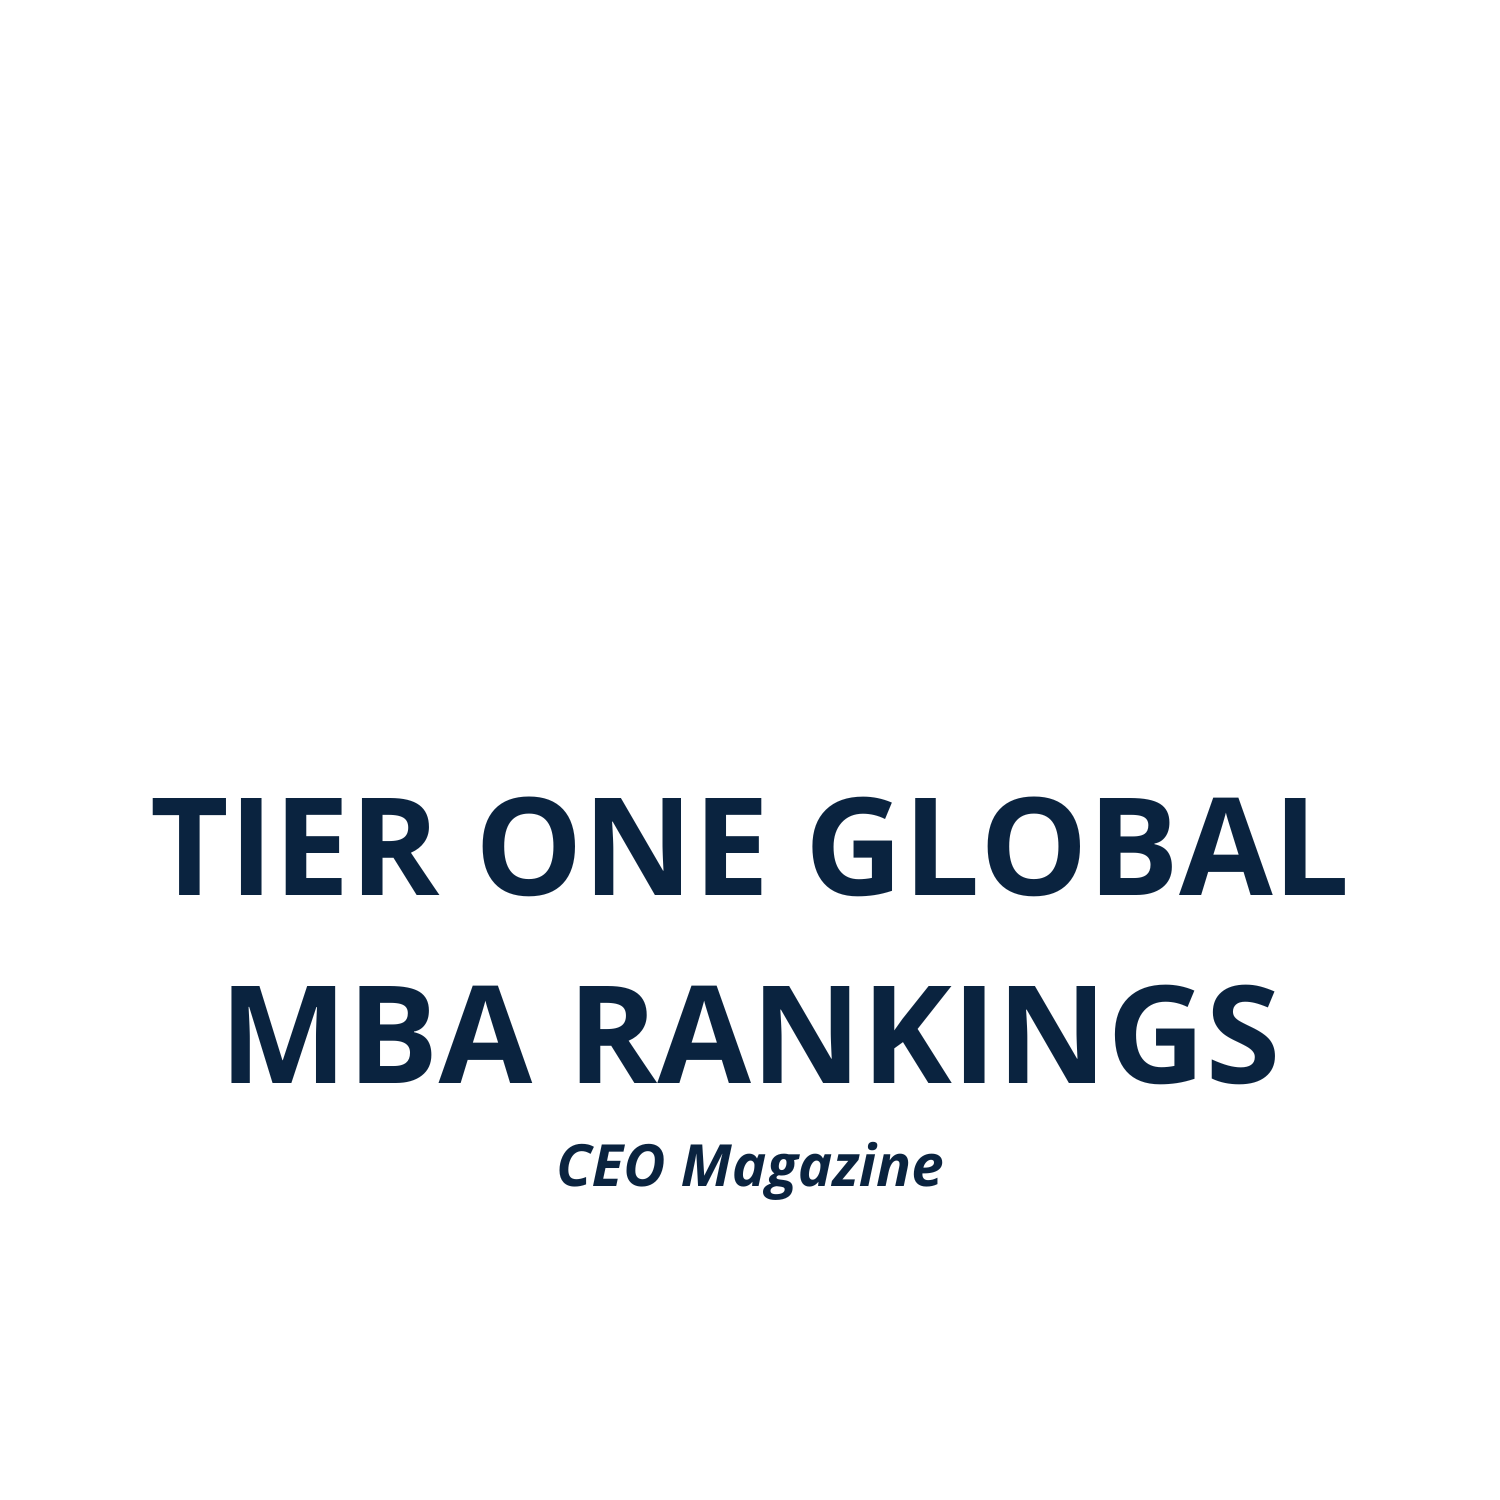 White and blue text of 2023 Tier One Global MBA Rankings CEO Magazine